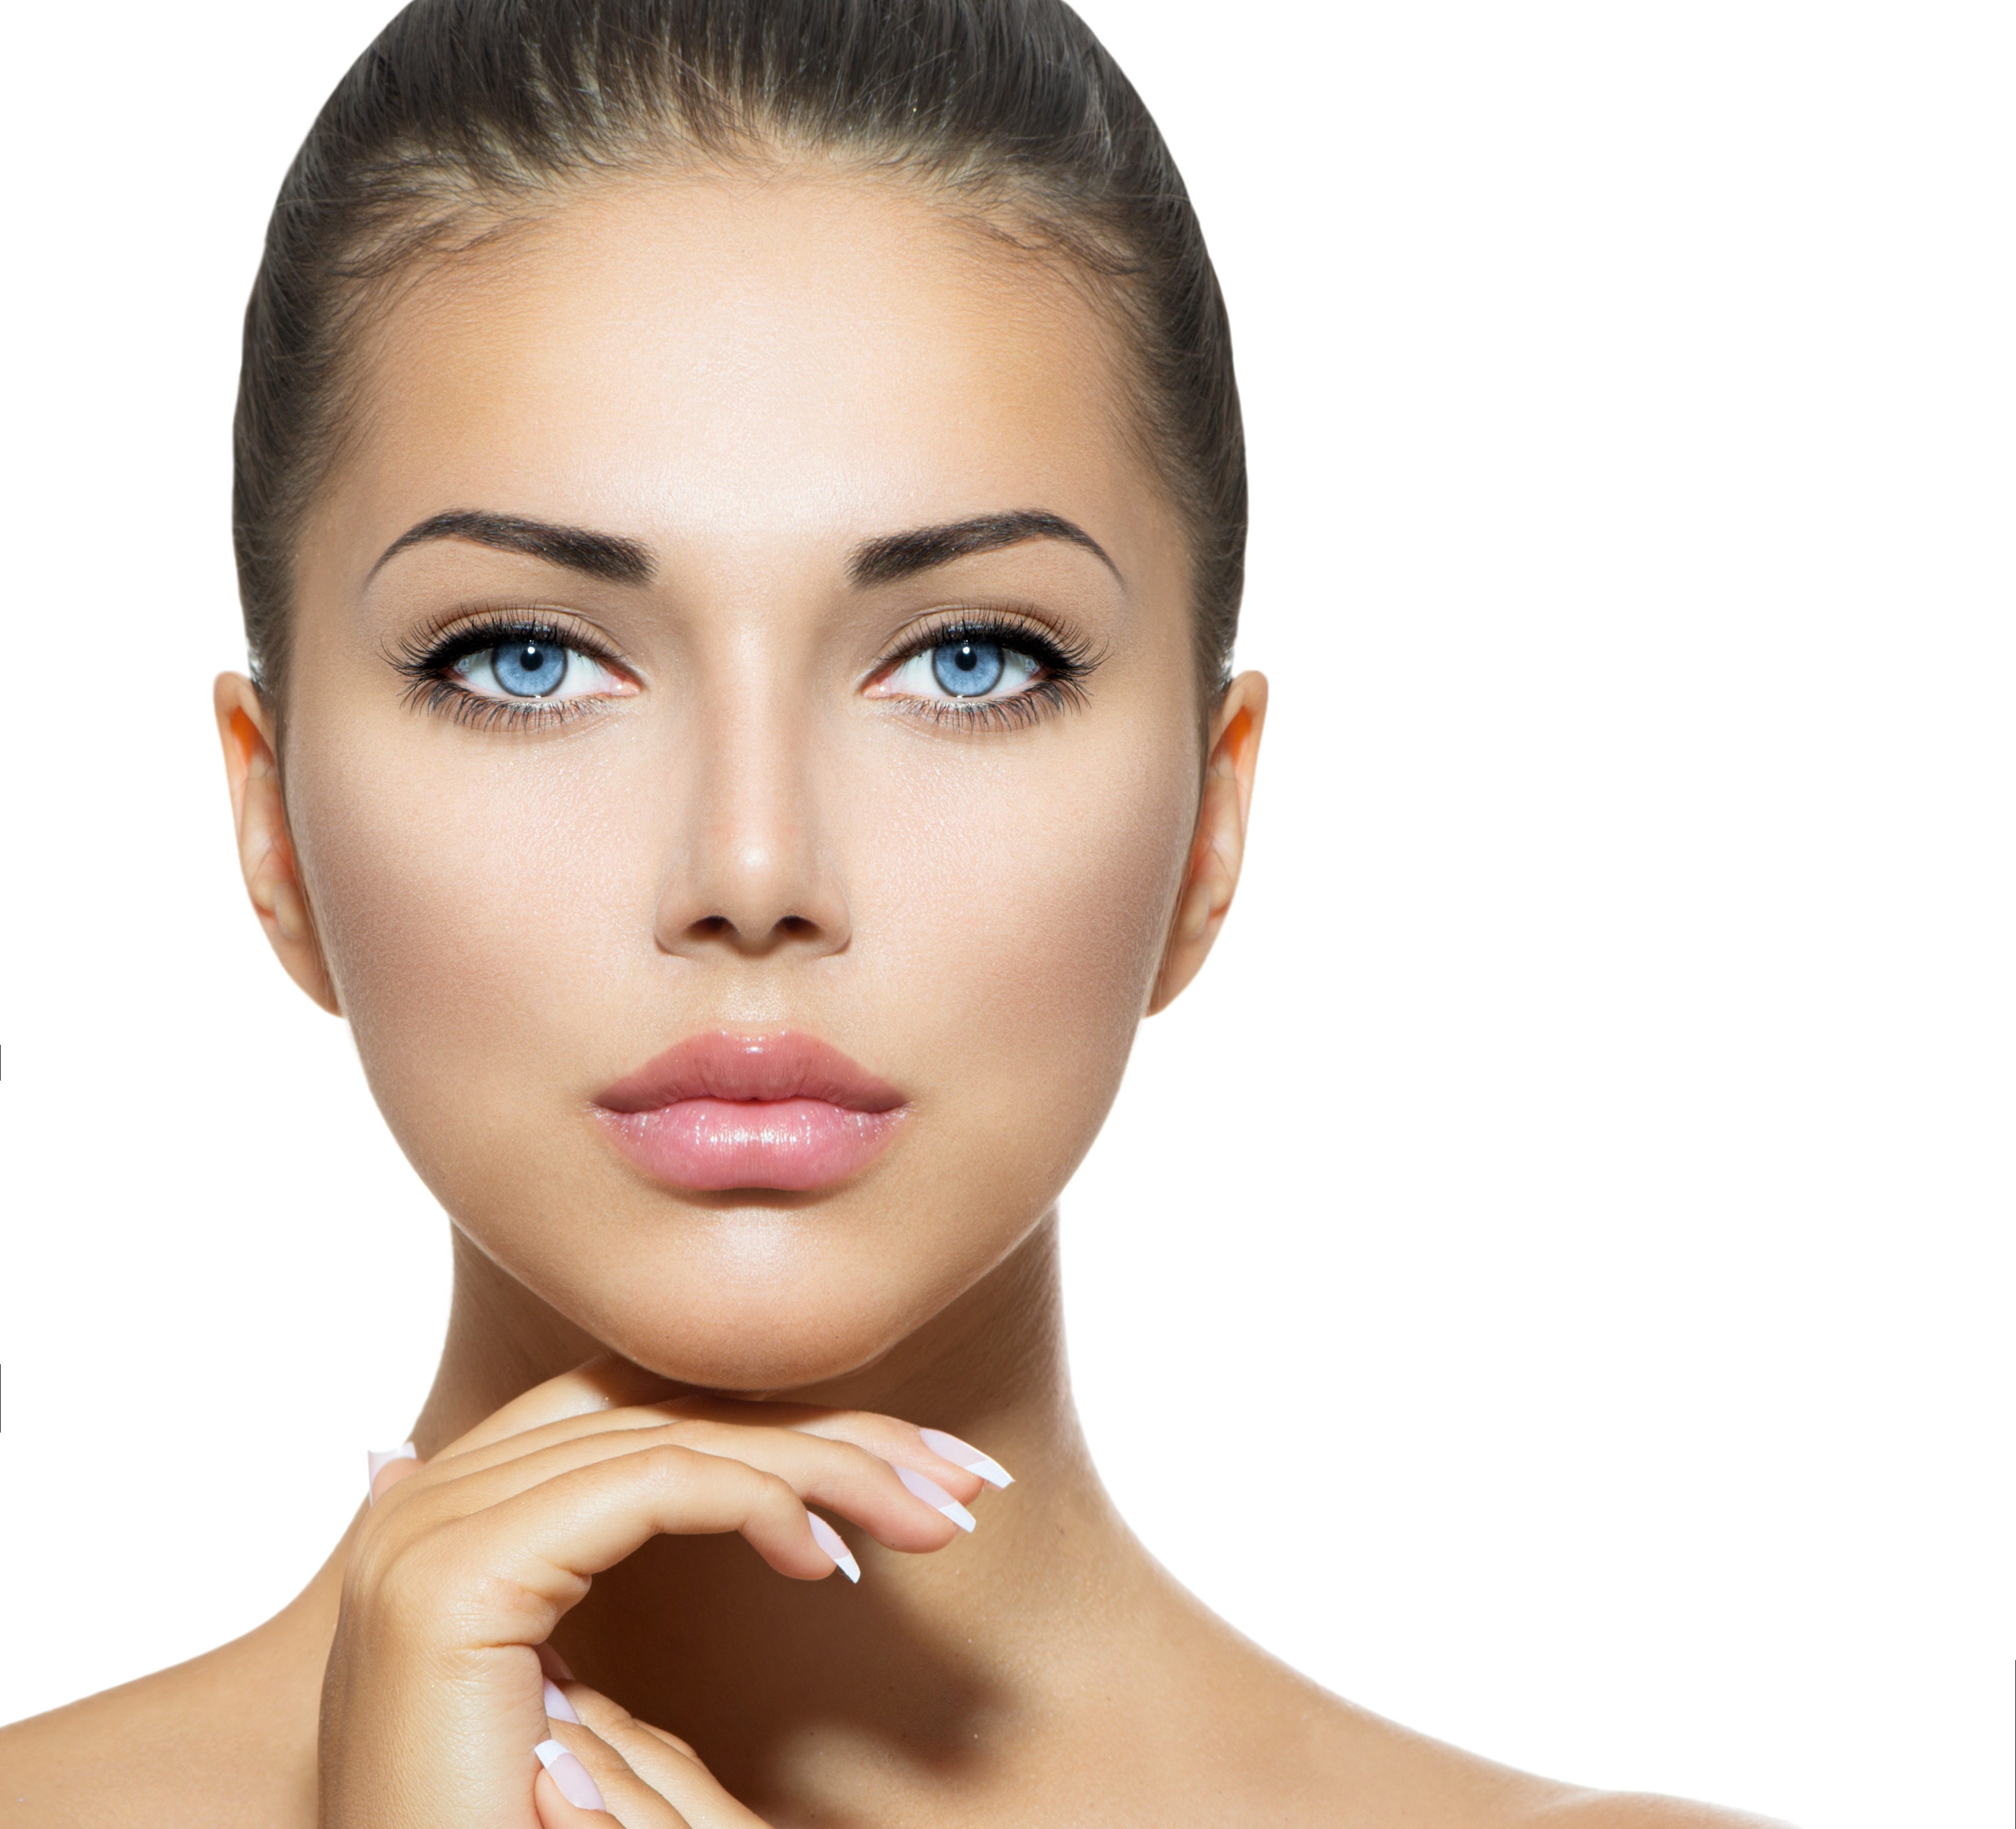 Plastic Surgery &#8211; Procedures, Average Cost, Recovery &#038; Risks